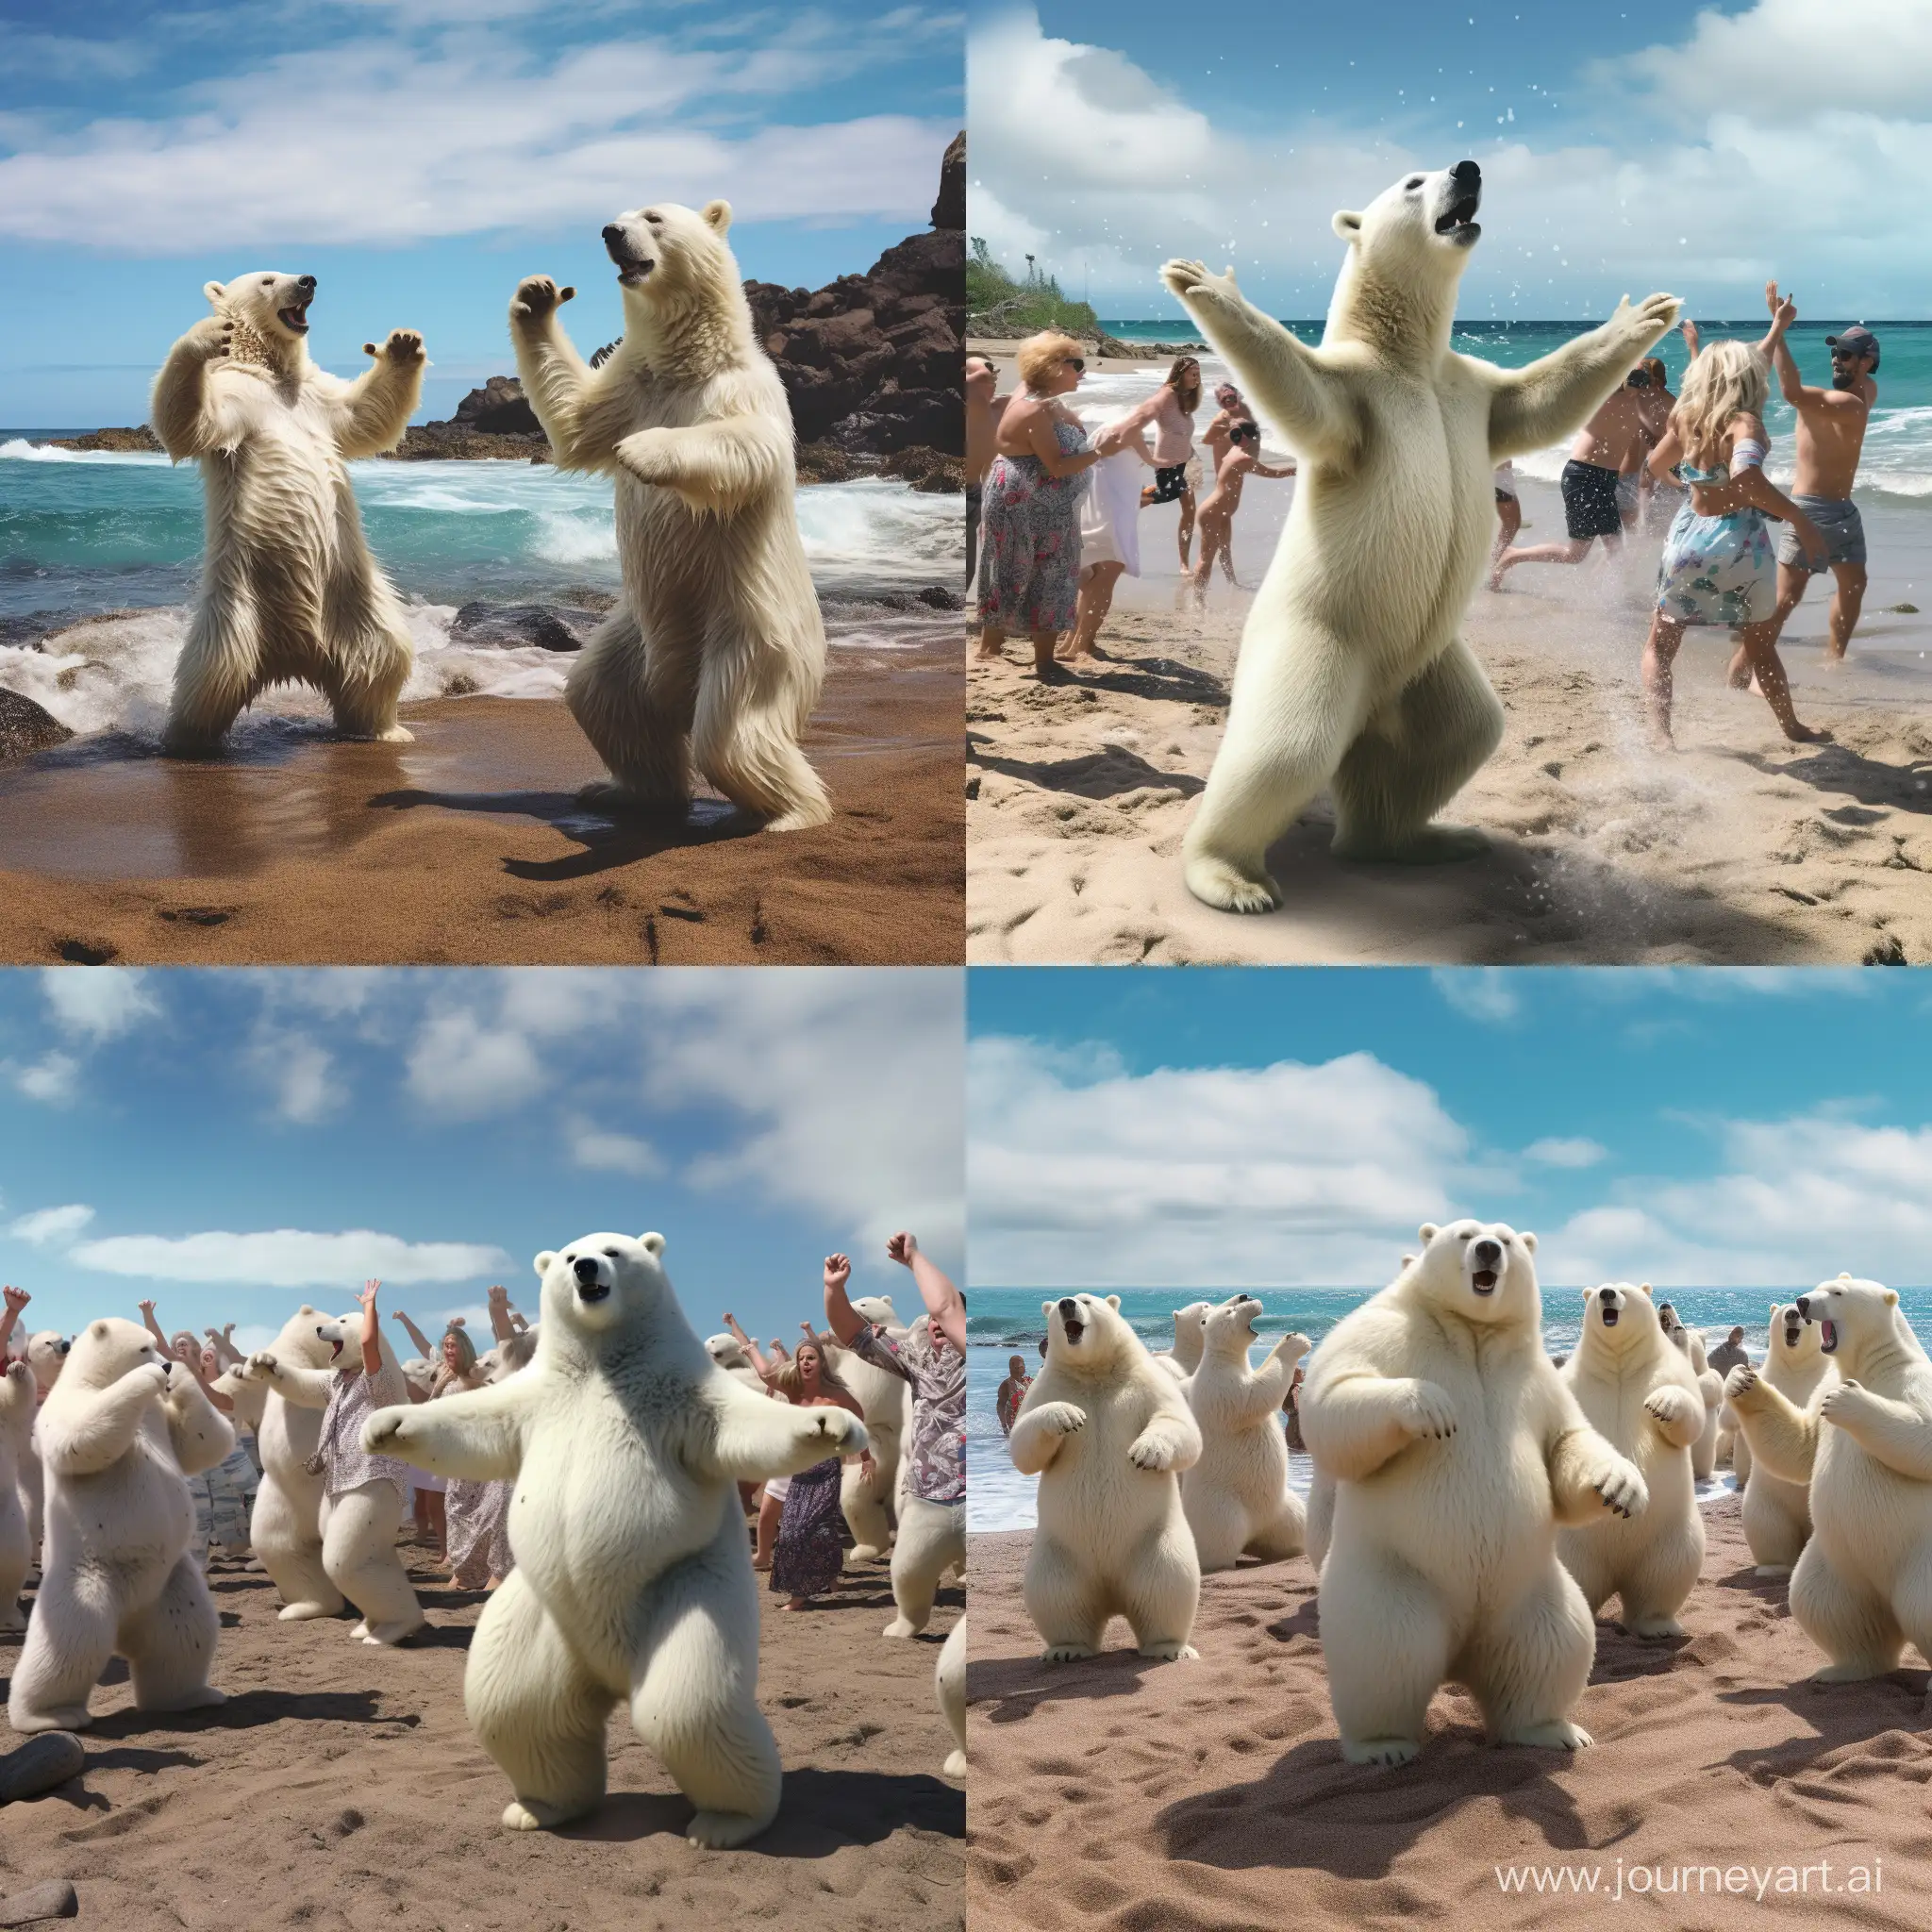 some polar bears dancing on a beach in hawaii while some people look at them and applaud them